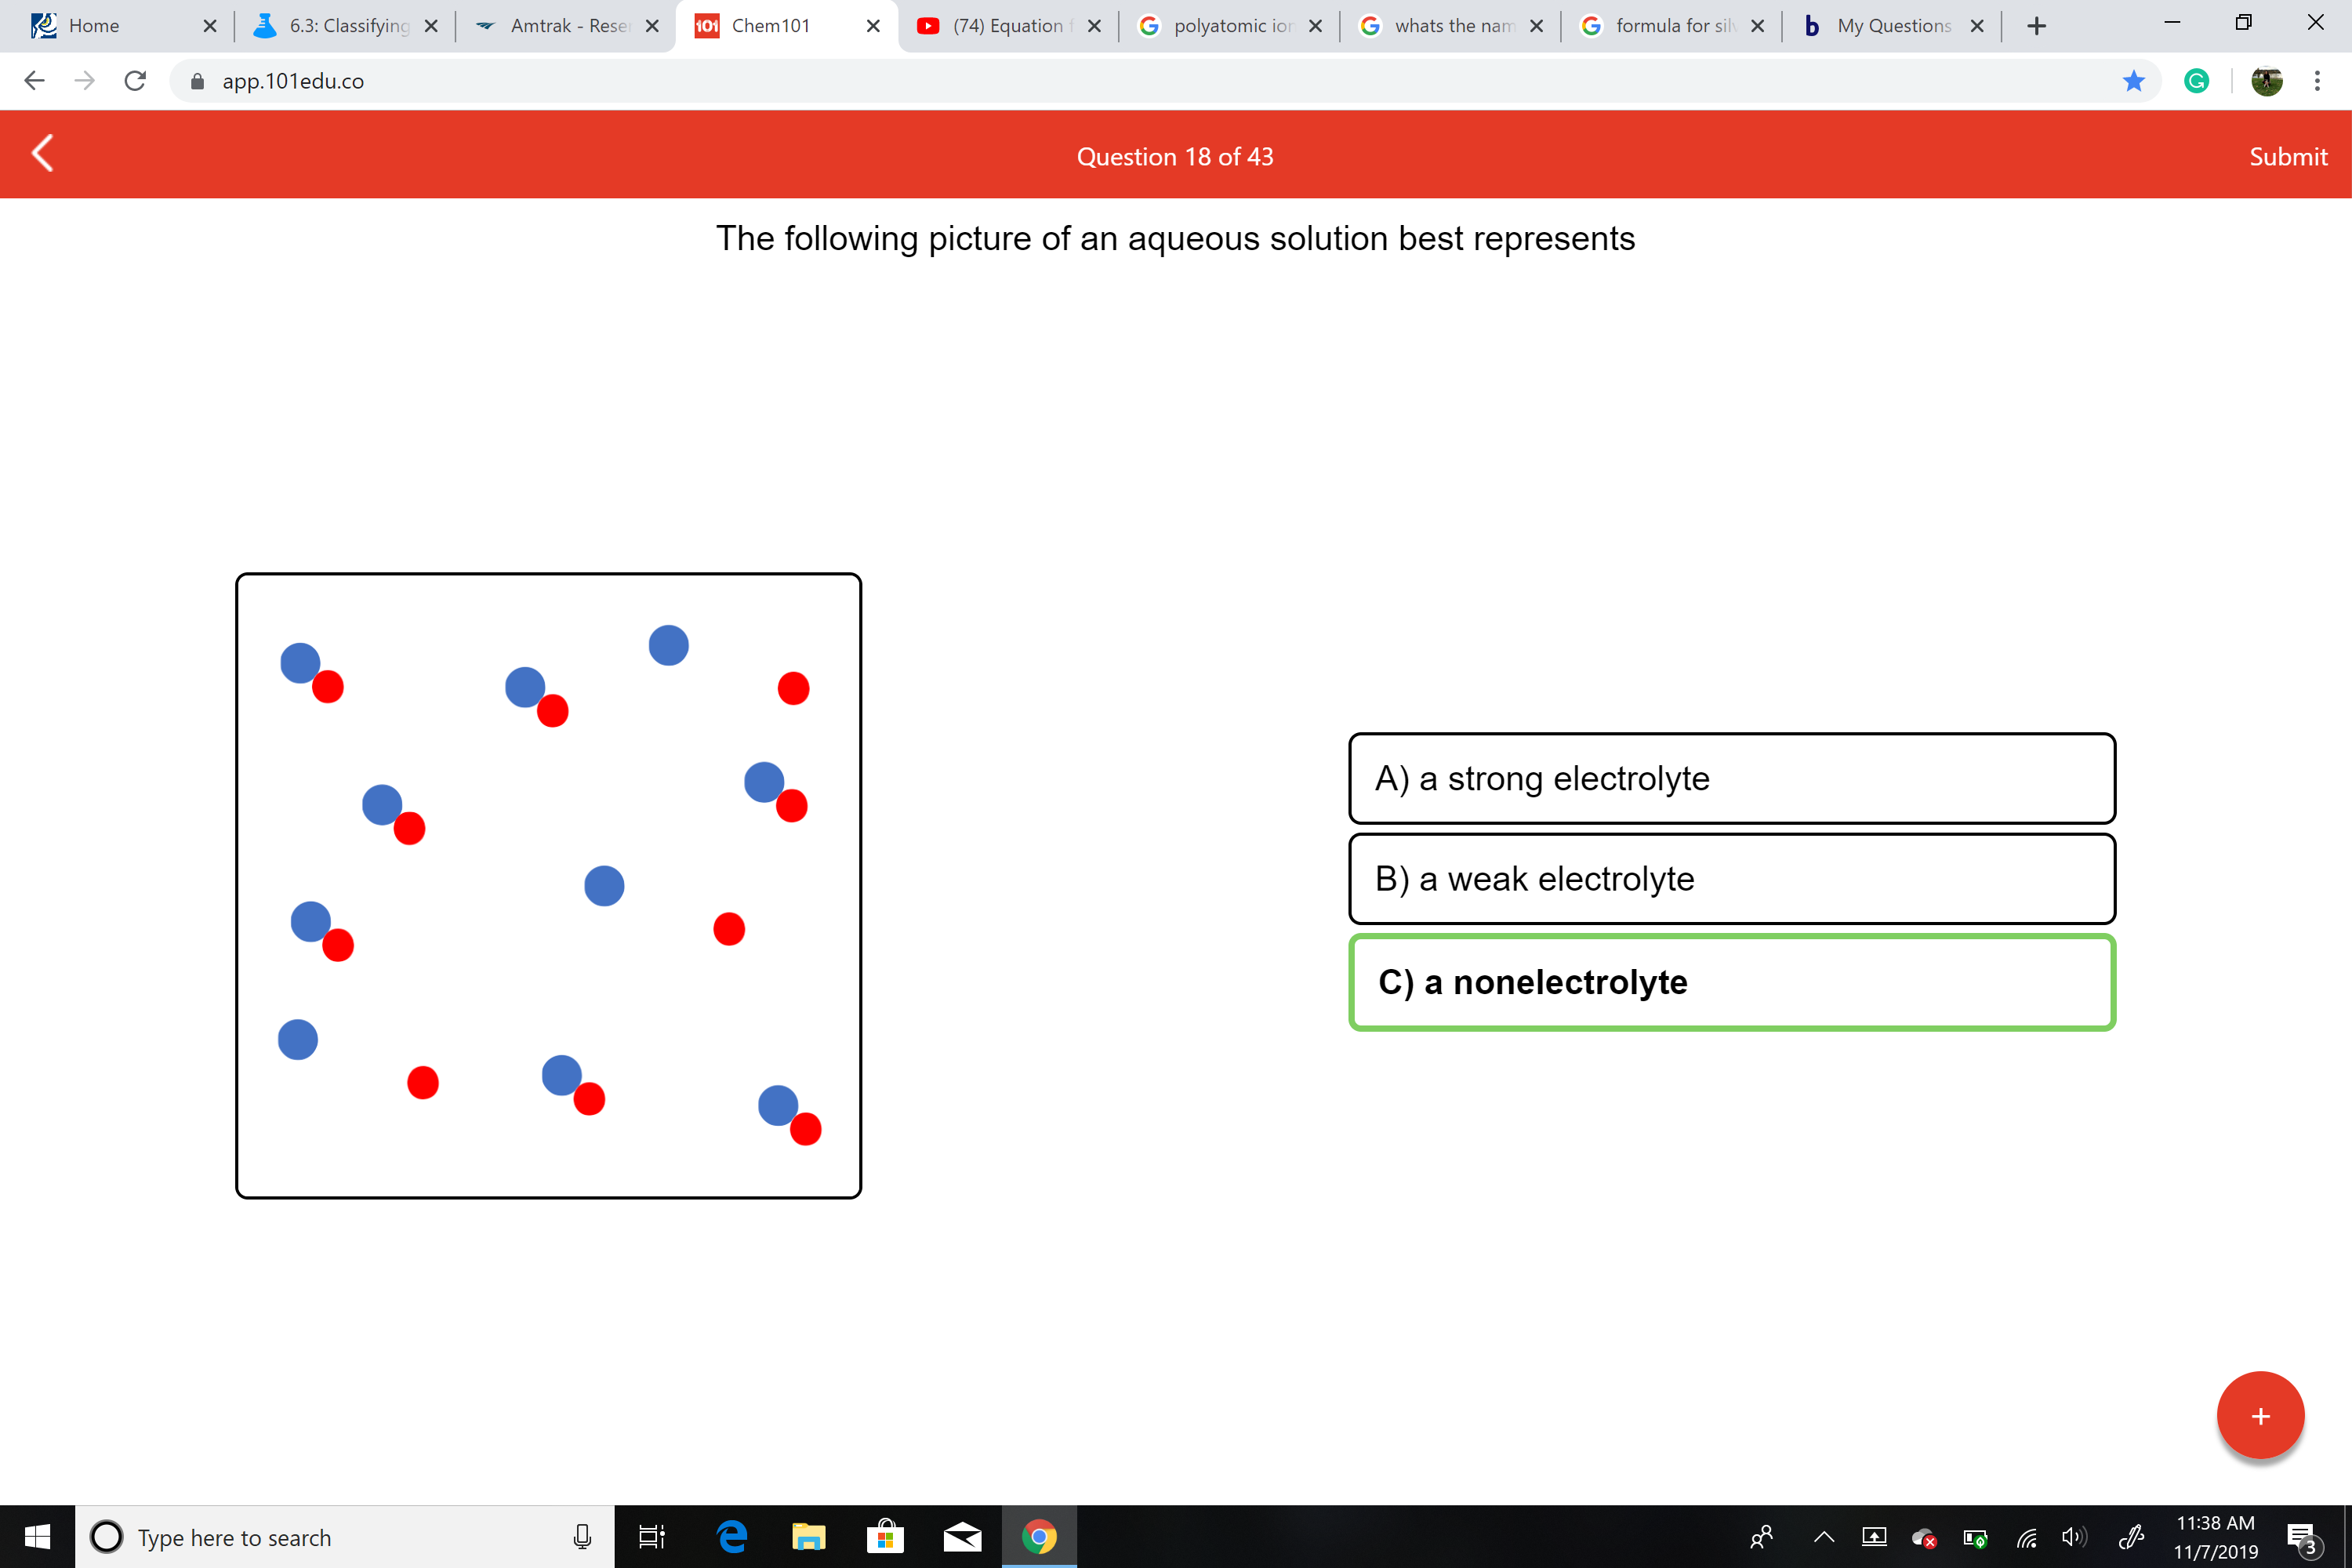 bMy Questions X
X
Home
G formula for silv X
Amtrak - Reser X
101 Chem 101
Gwhats the namX
G polyatomic ion X
6.3: Classifying x
(74) Equation x
X
X
app.101edu.co
Submit
Question 18 of 43
The following picture of an aqueous solution best represents
A) a strong electrolyte
B) a weak electrolyte
C) a nonelectrolyte
11:38 AM
е
OType here to search
11/7/2019
